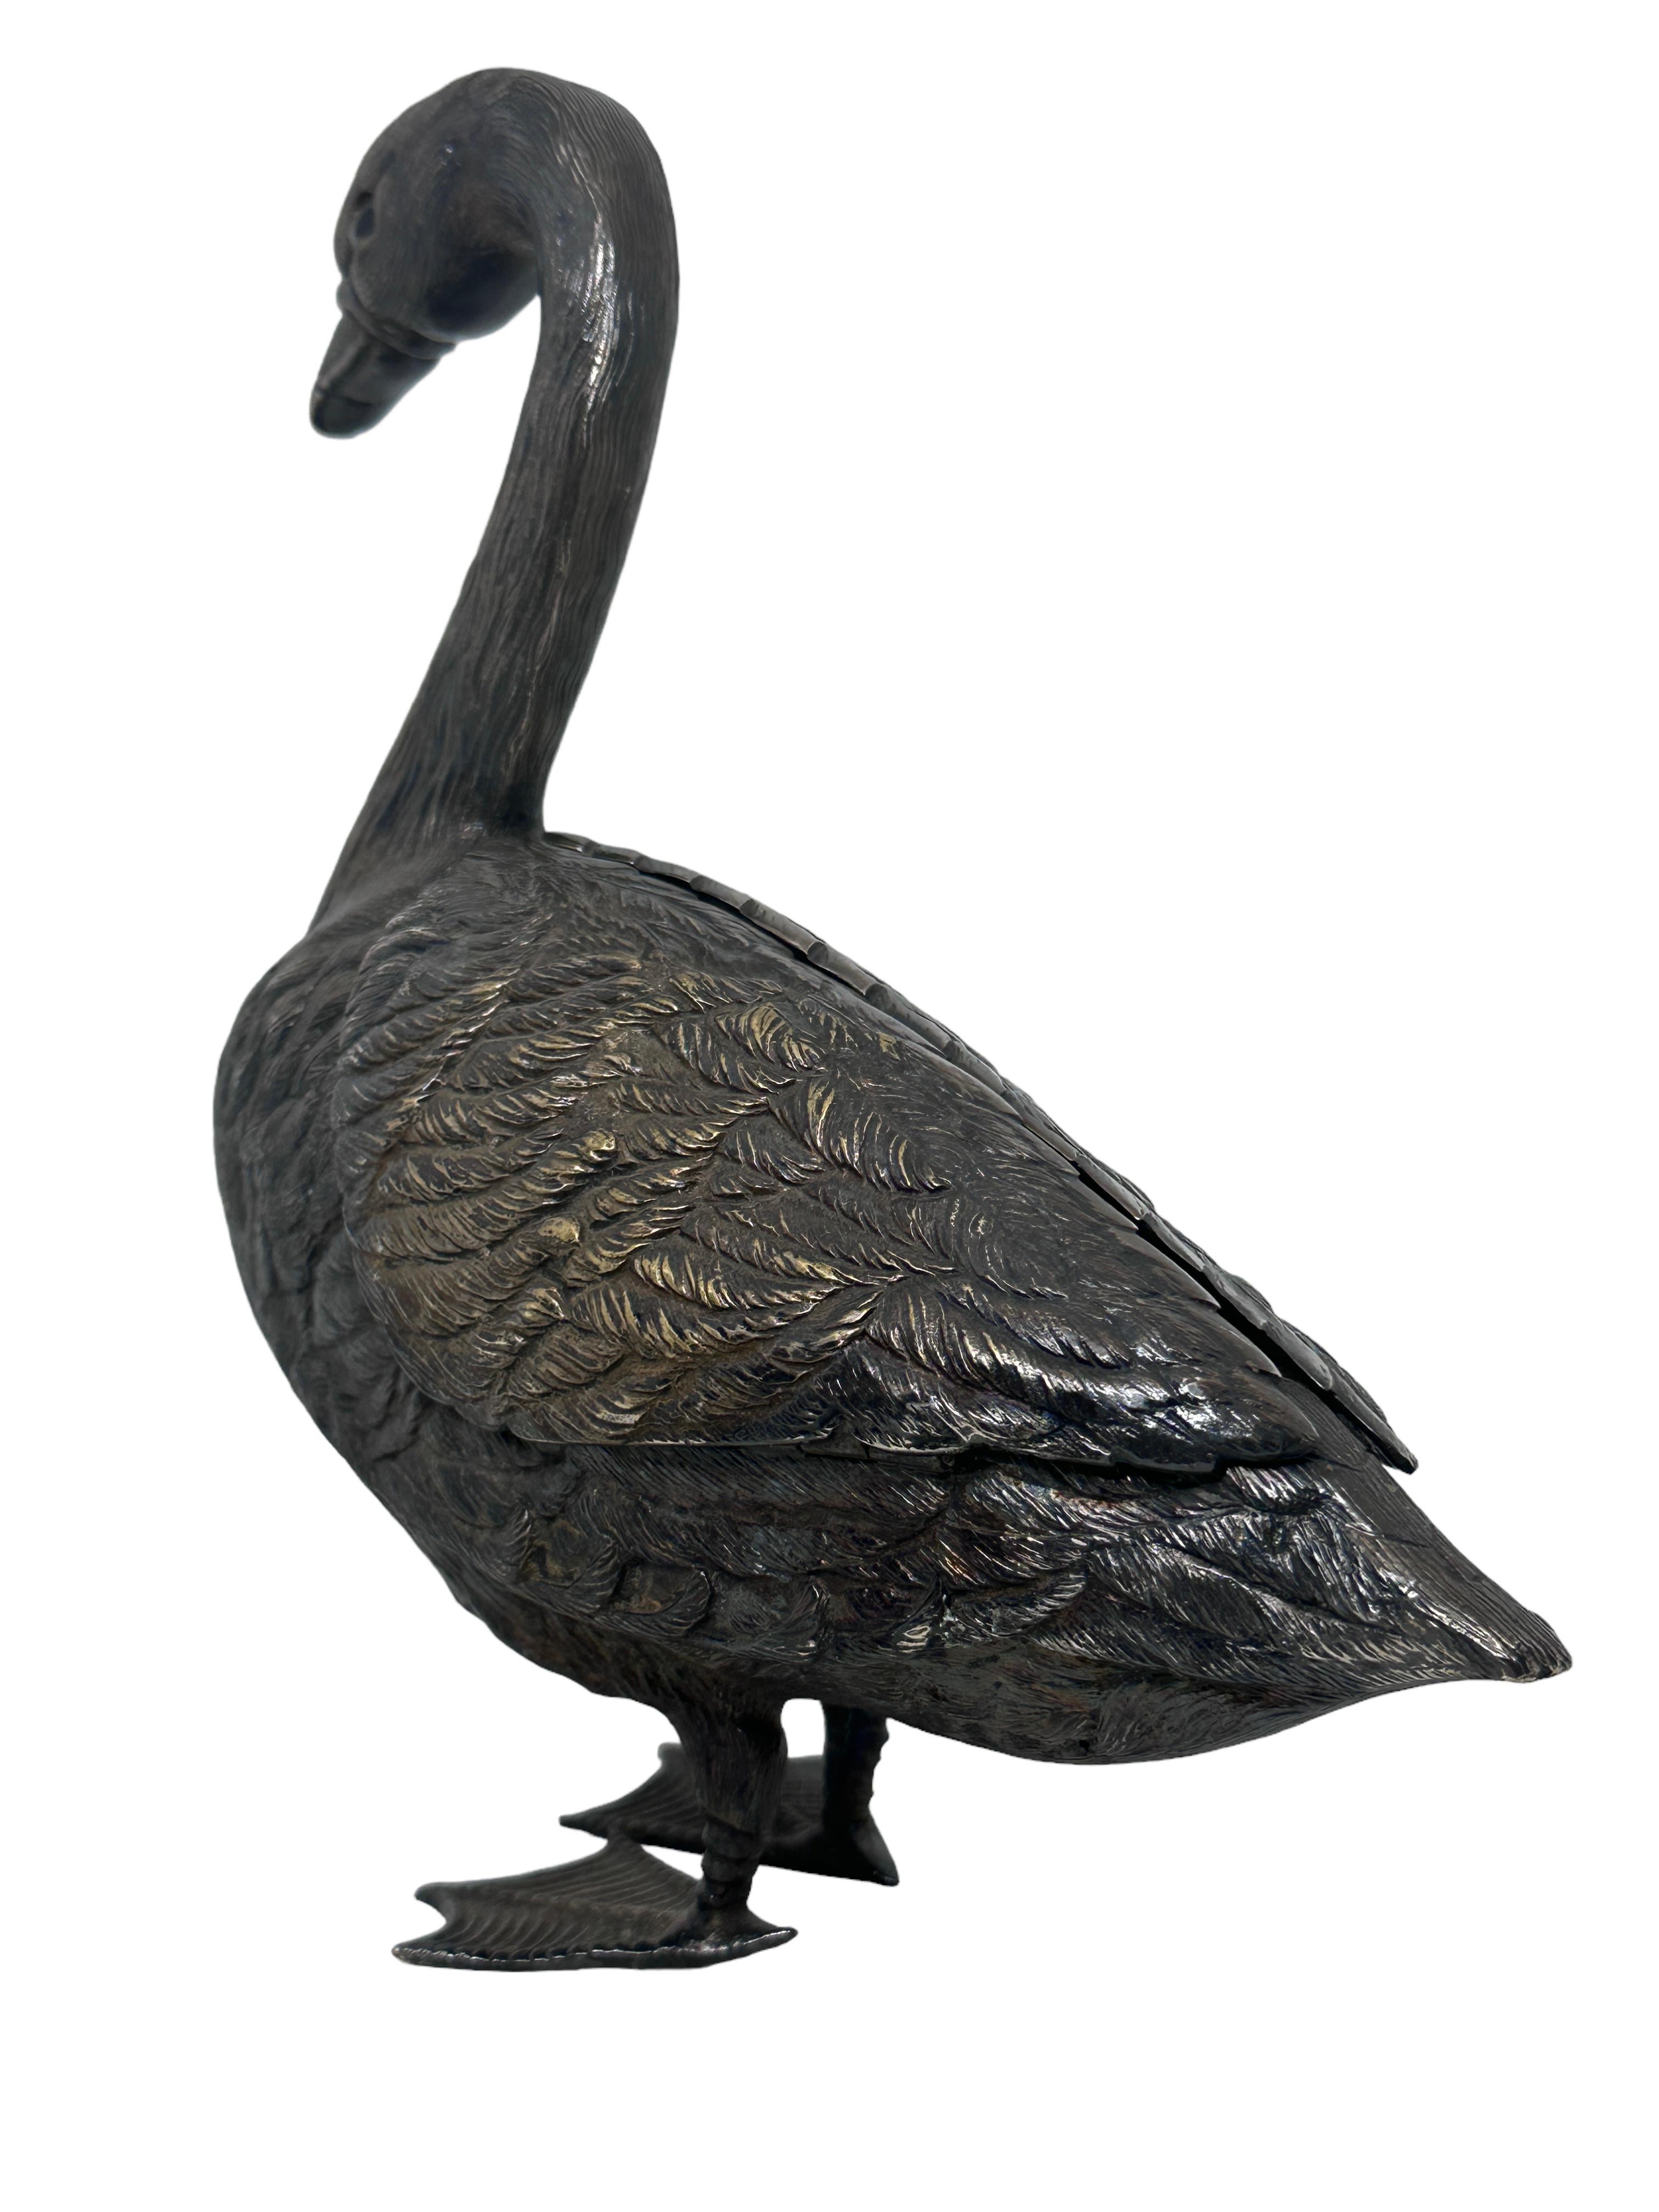 Romantic Silver Plate Duck Table Statue Sculpture for Side Dishes Antique European For Sale